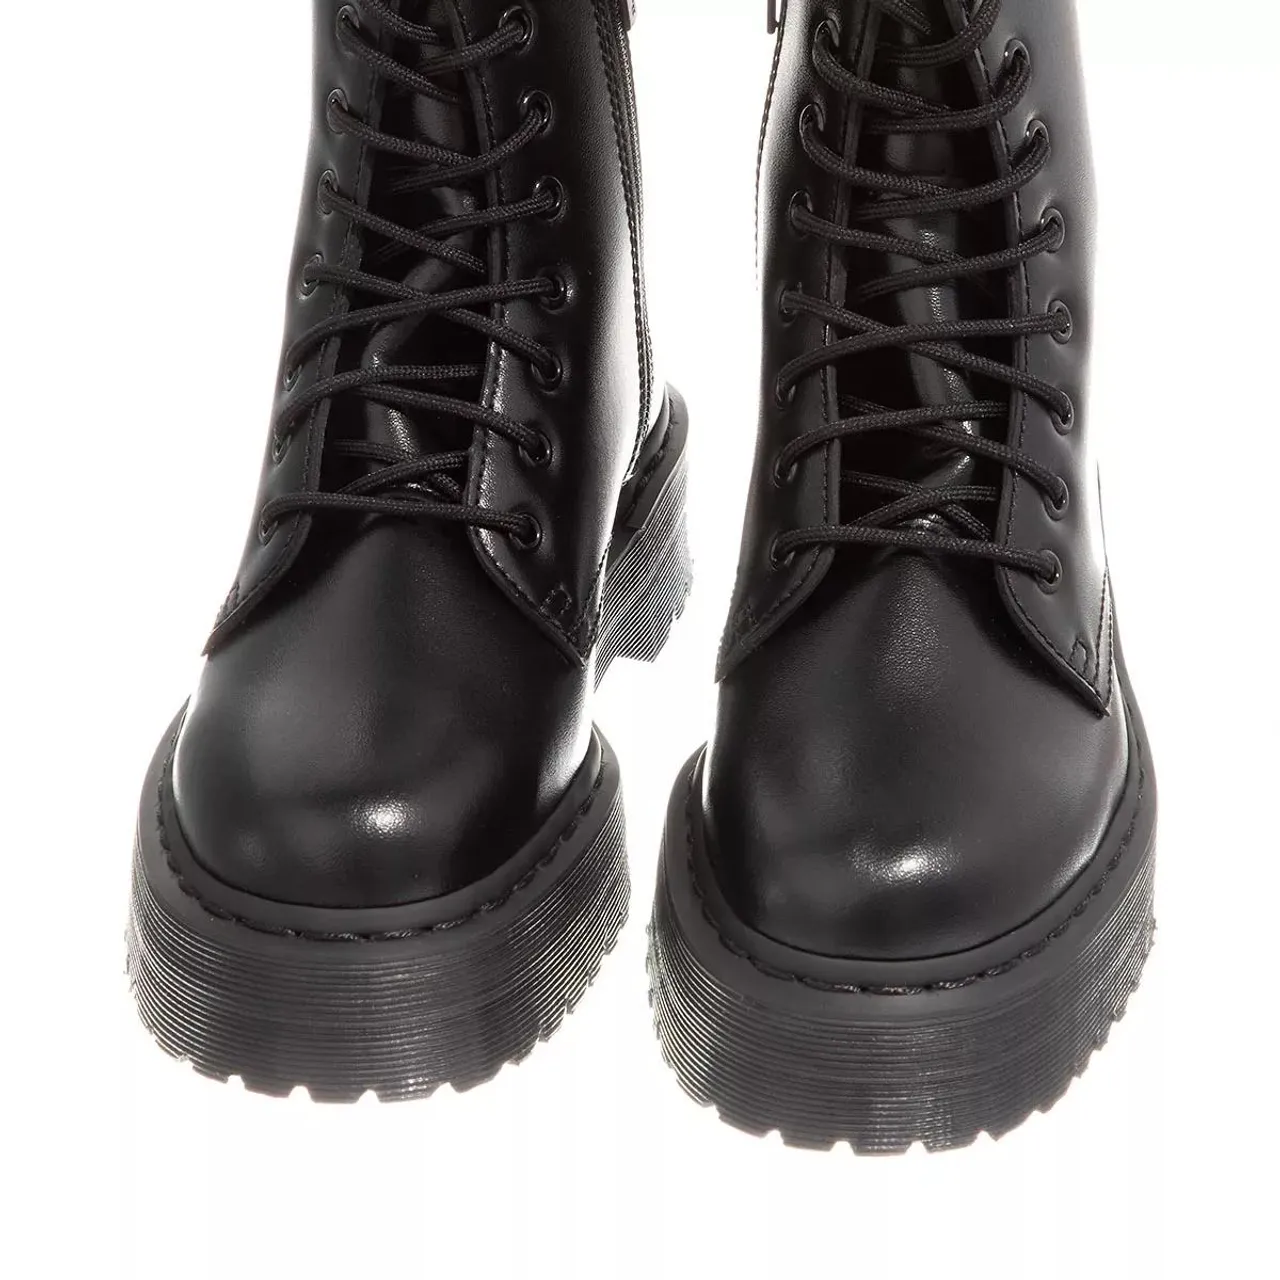 Dr. Martens Boots & Ankle Boots - V Jadon II Mono - black - Boots & Ankle Boots for ladies